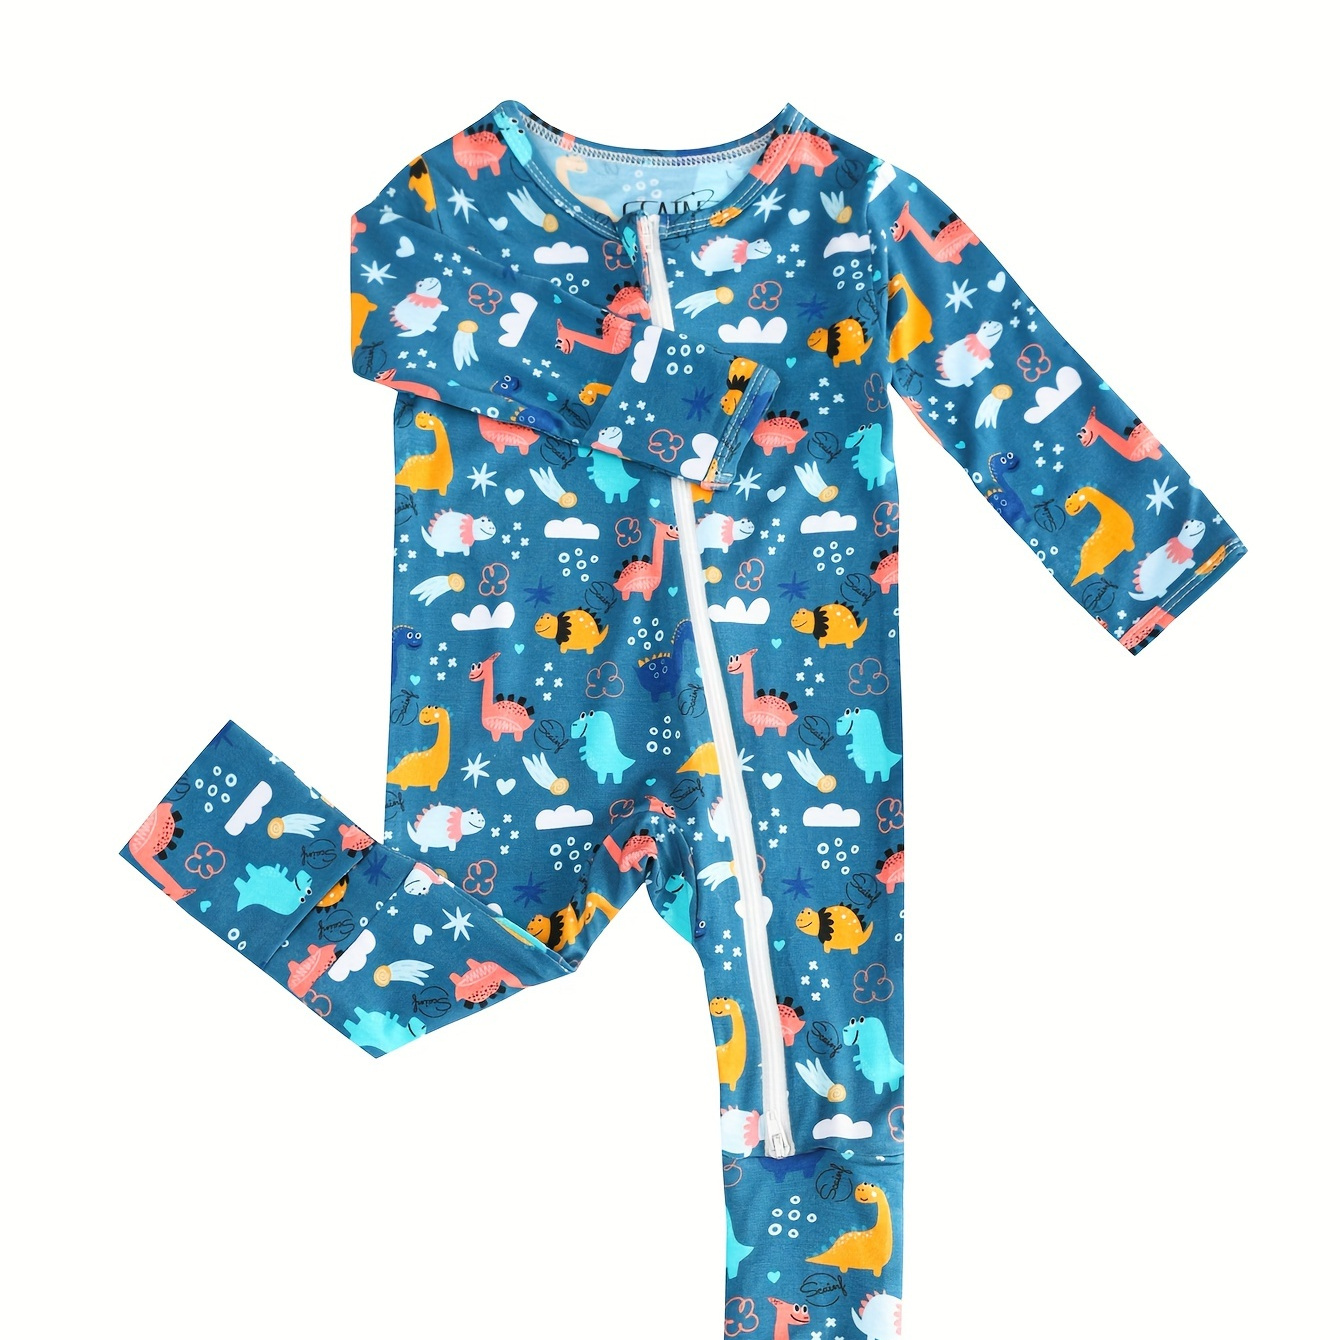 

Infant's Comfy Bamboo Fiber Bodysuit, Dinosaur All-over Print Casual Long Sleeve Romper, Baby Boy's Clothing